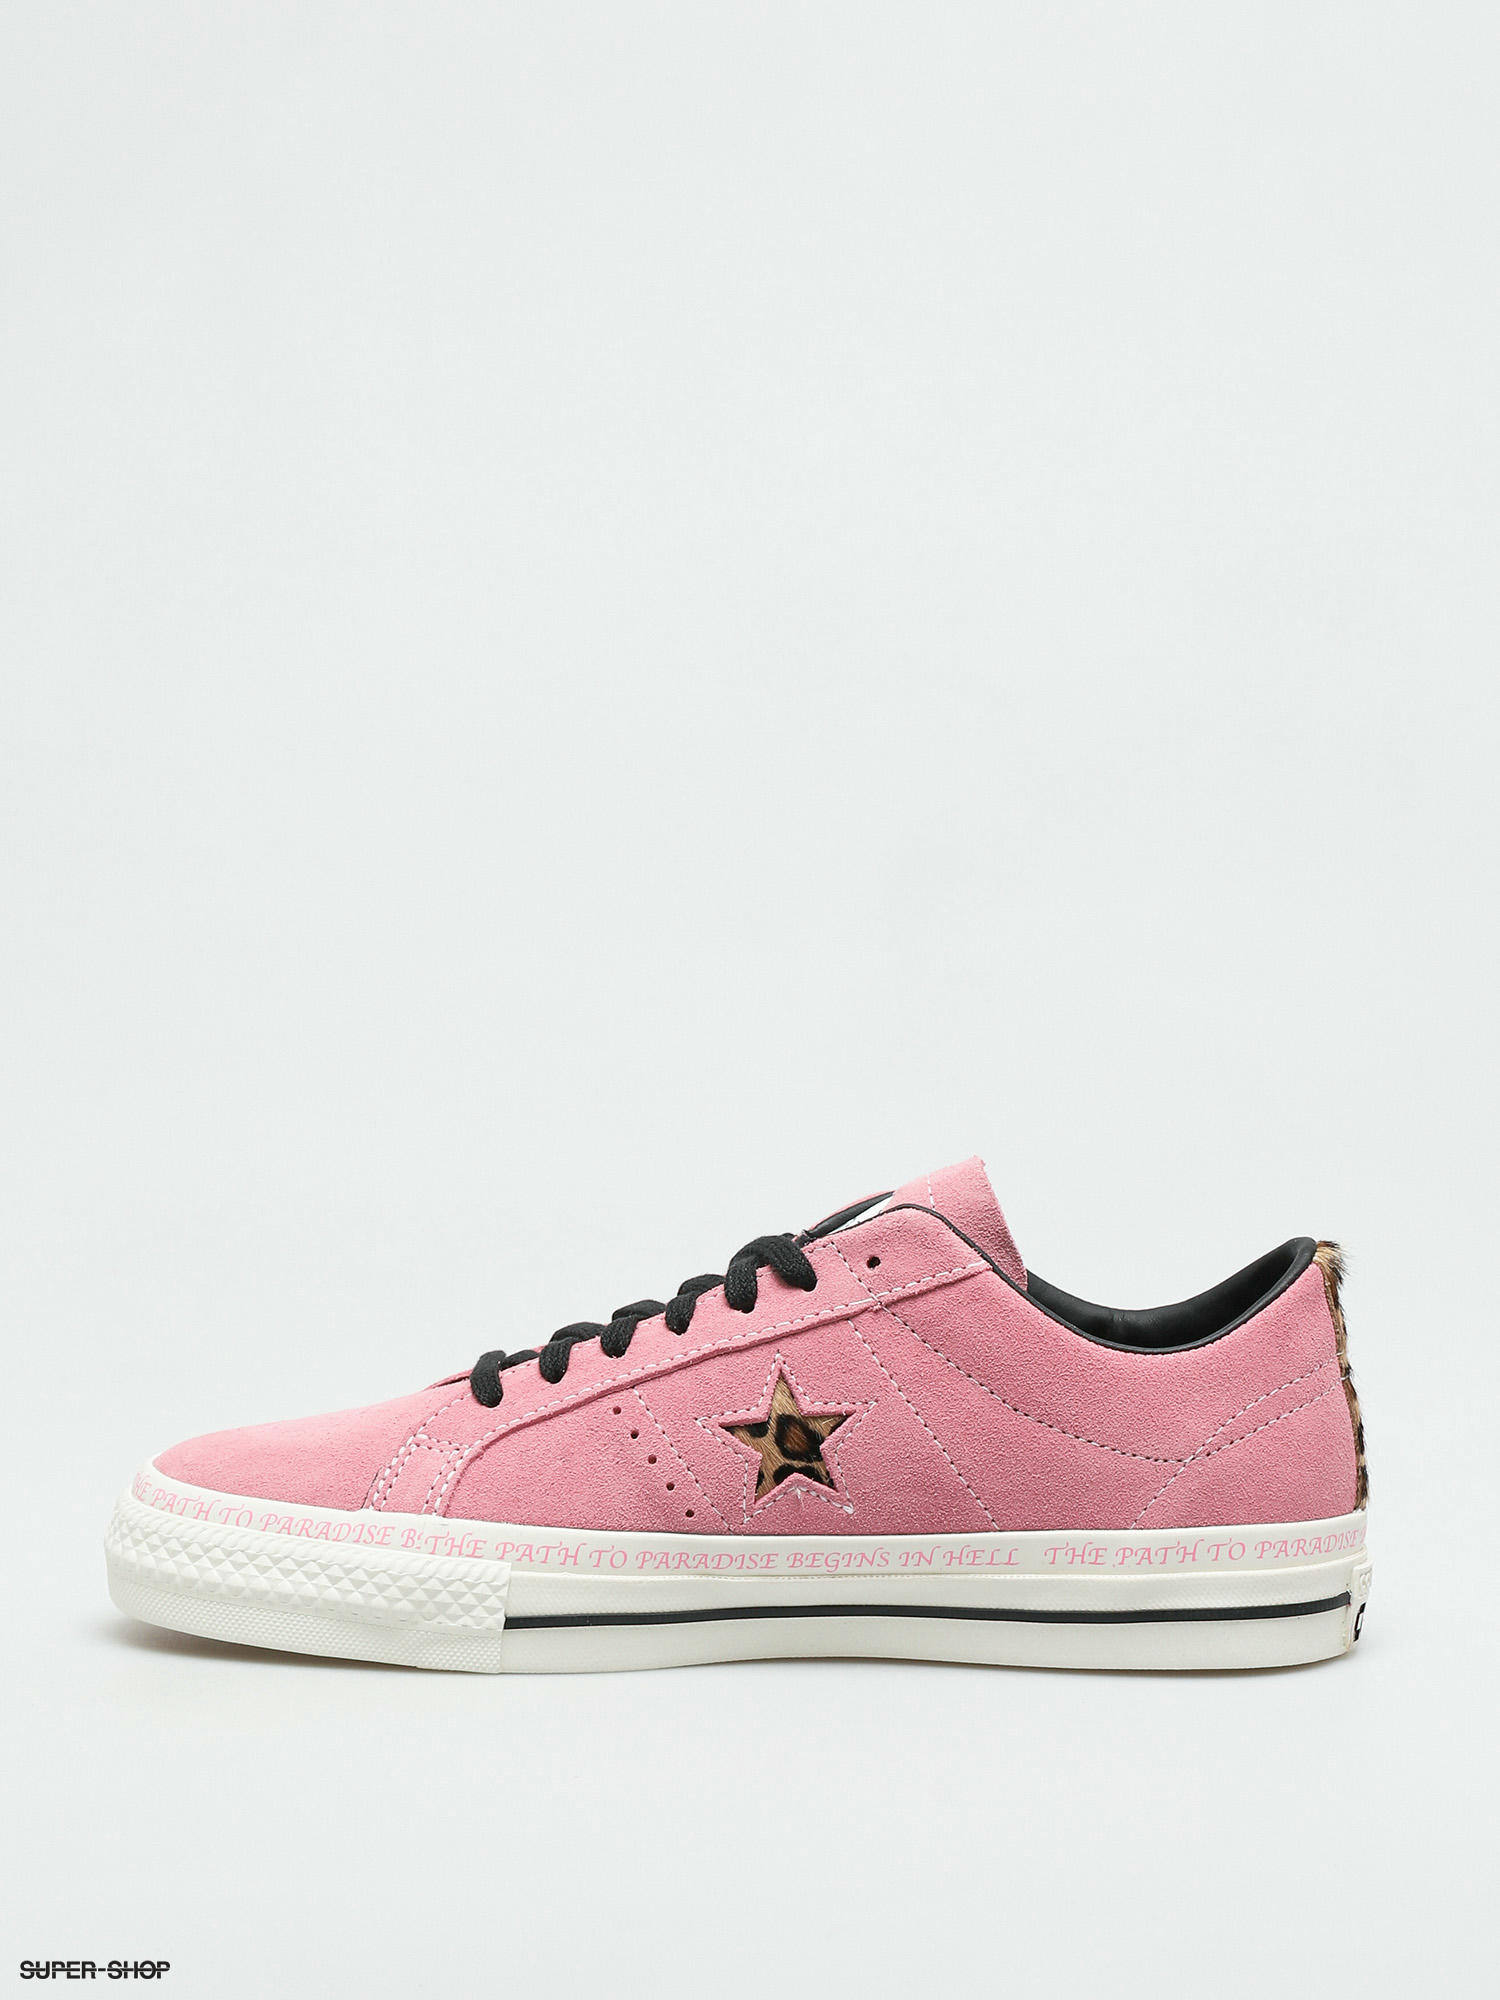 converse one star pro dusty pink